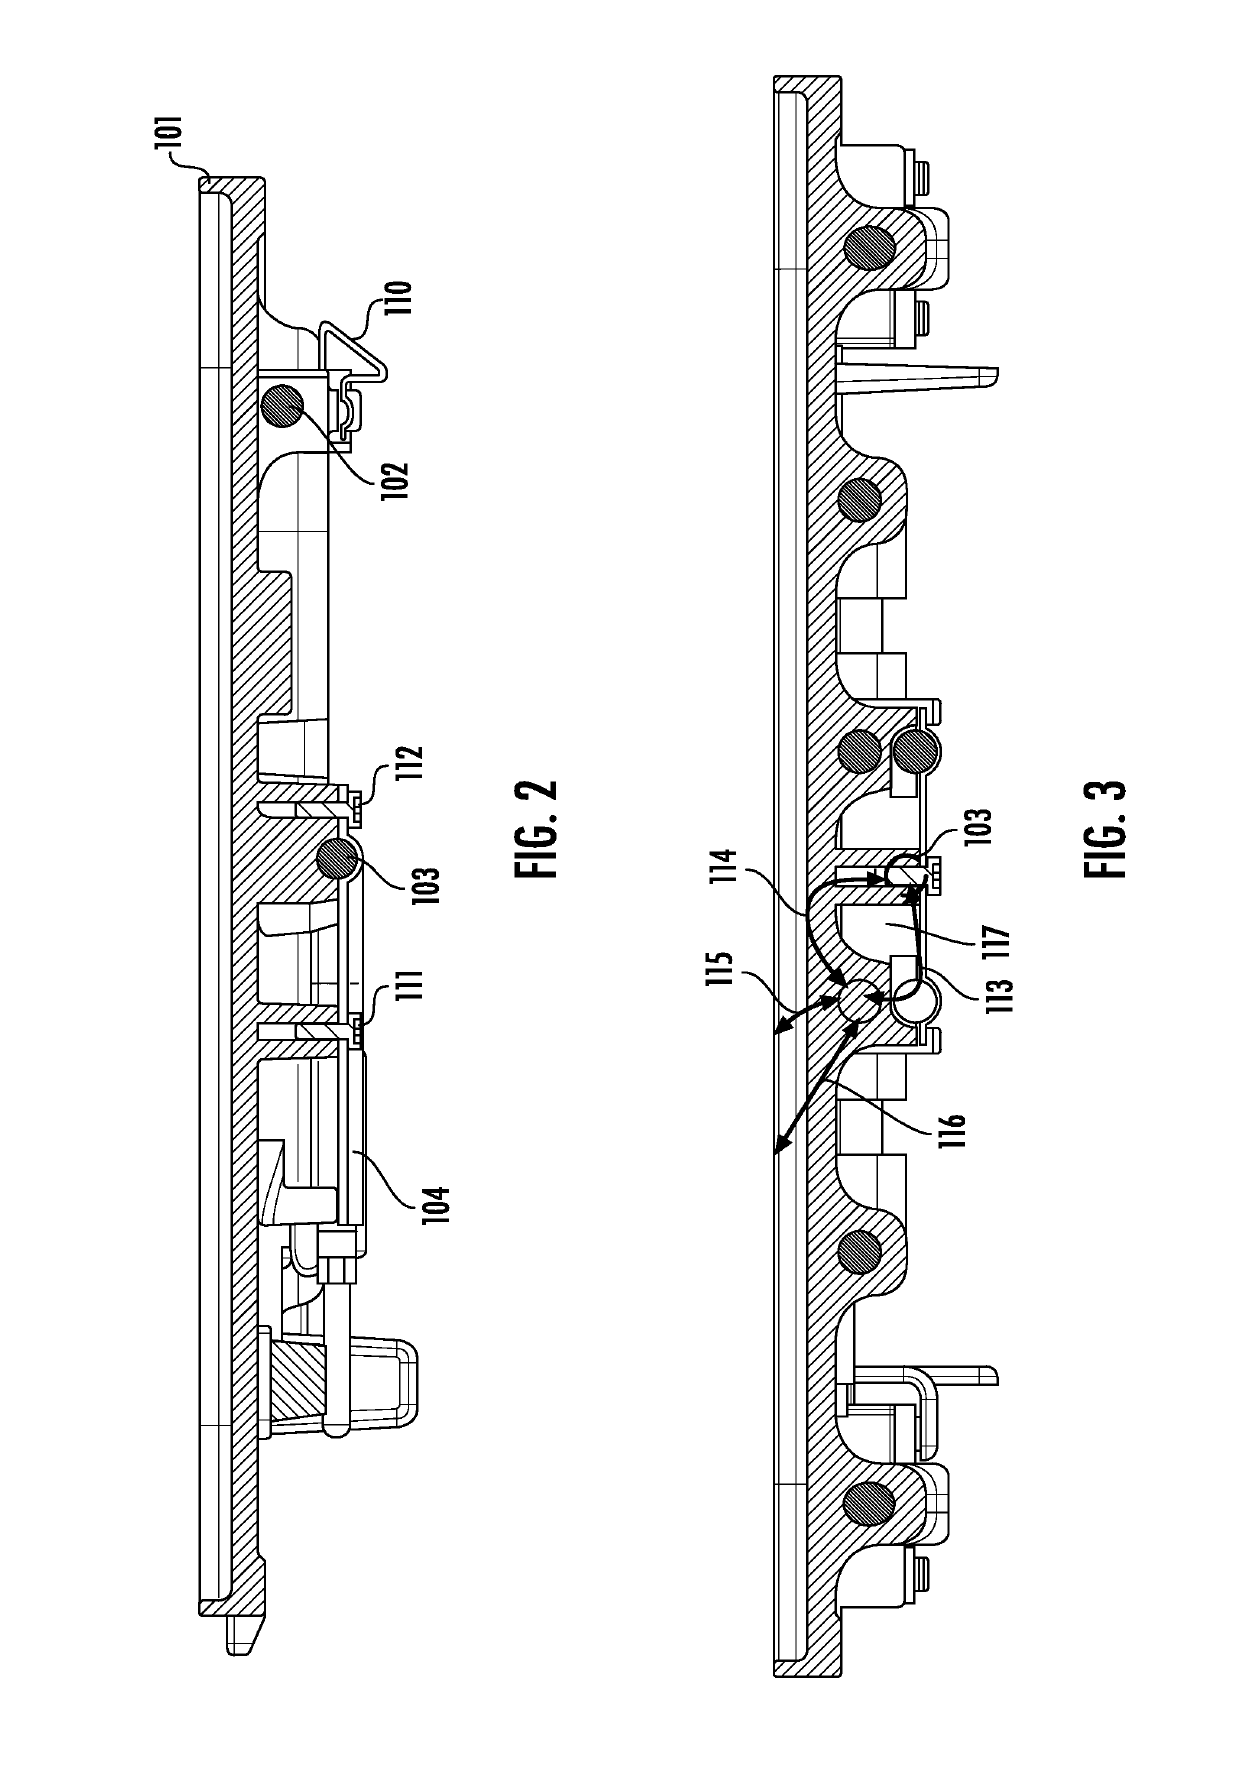 Method of forming cooking plate with temperature sensing element